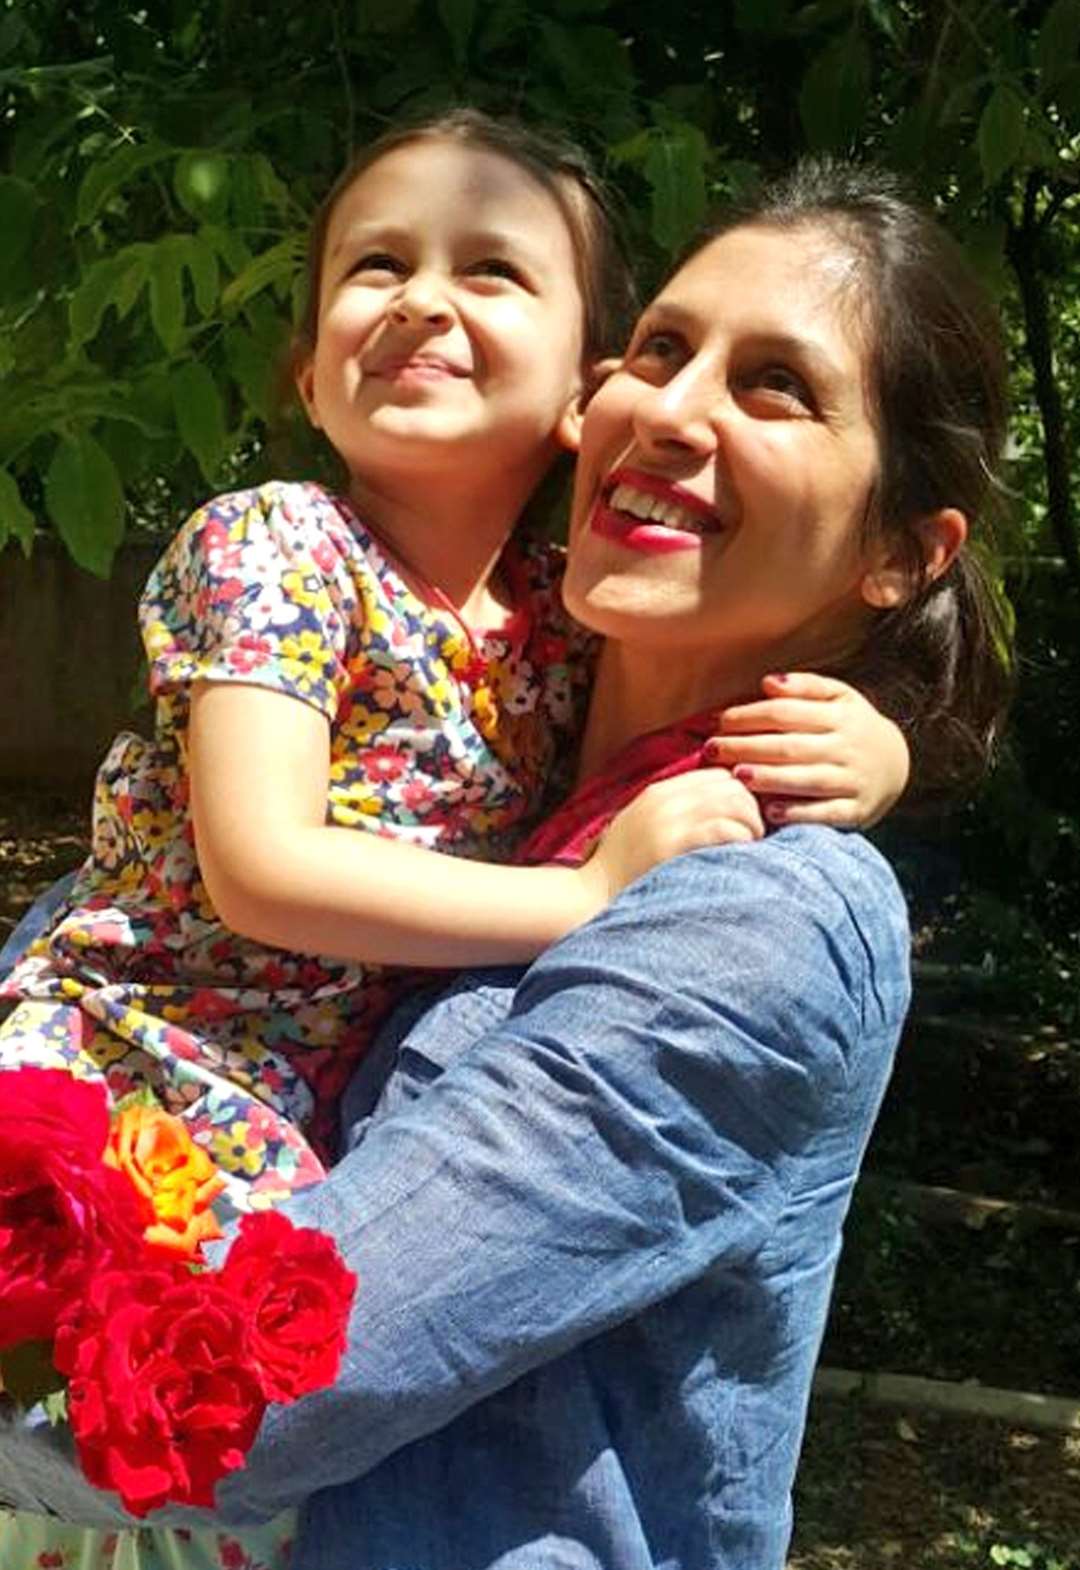 Nazanin Zaghari-Ratcliffe with her daughter Gabriella during her temporary release from prison in Iran (Family handout)